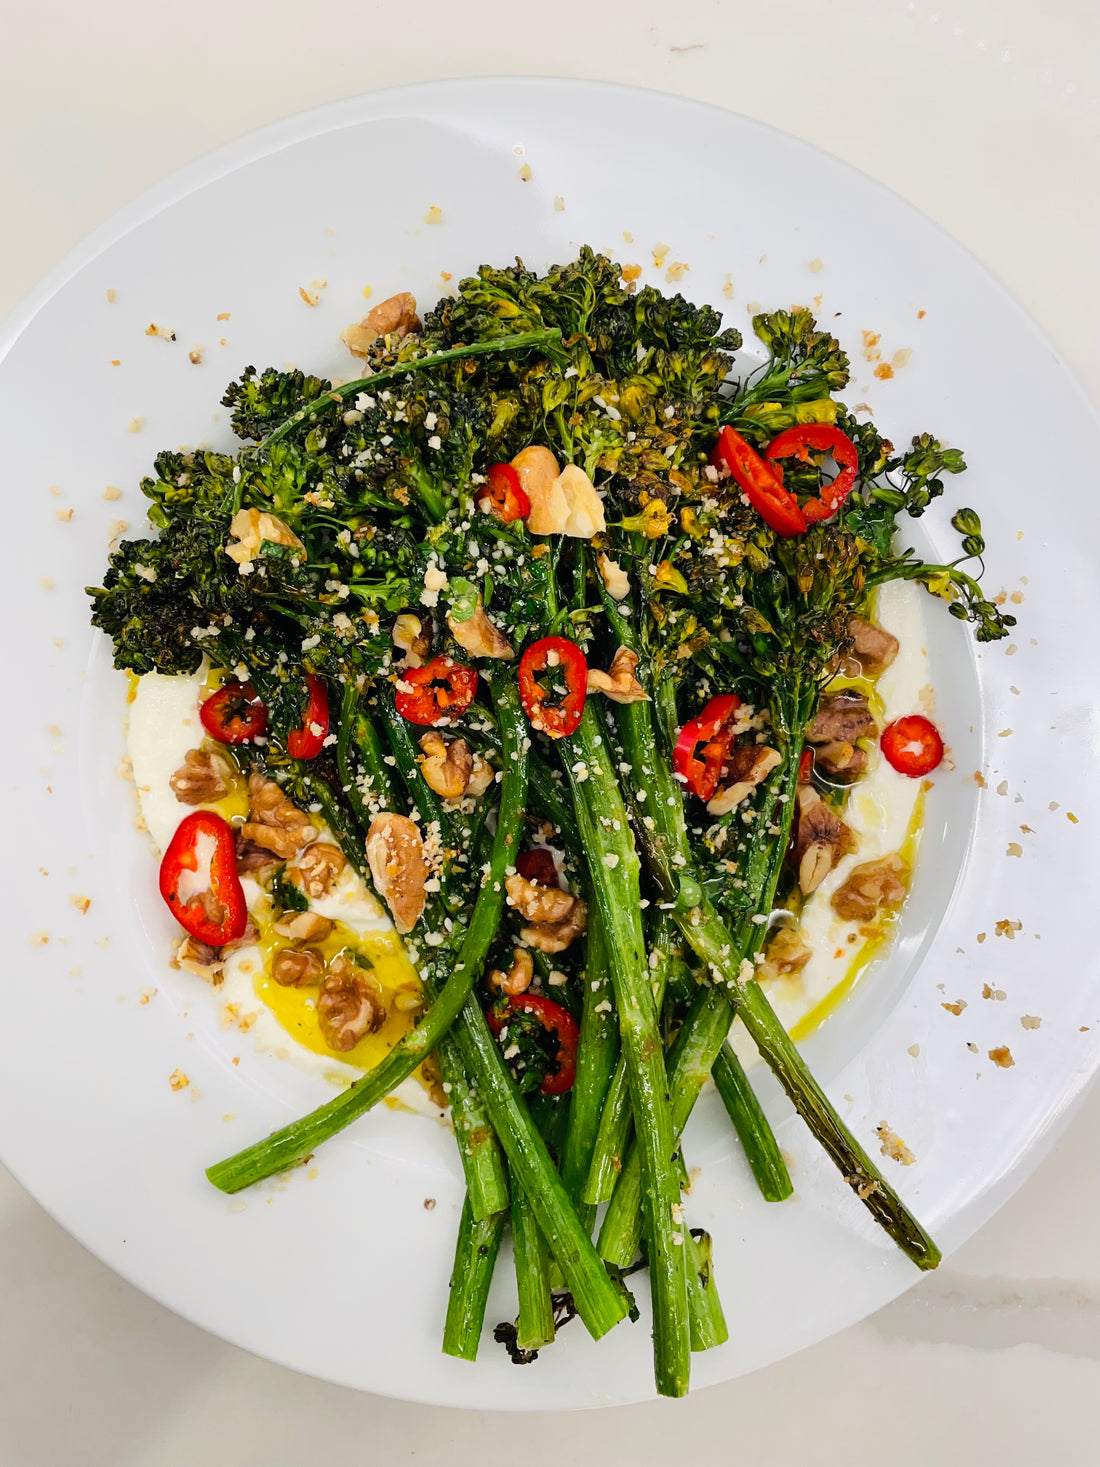 Roasted Broccolini over Whipped Ricotta